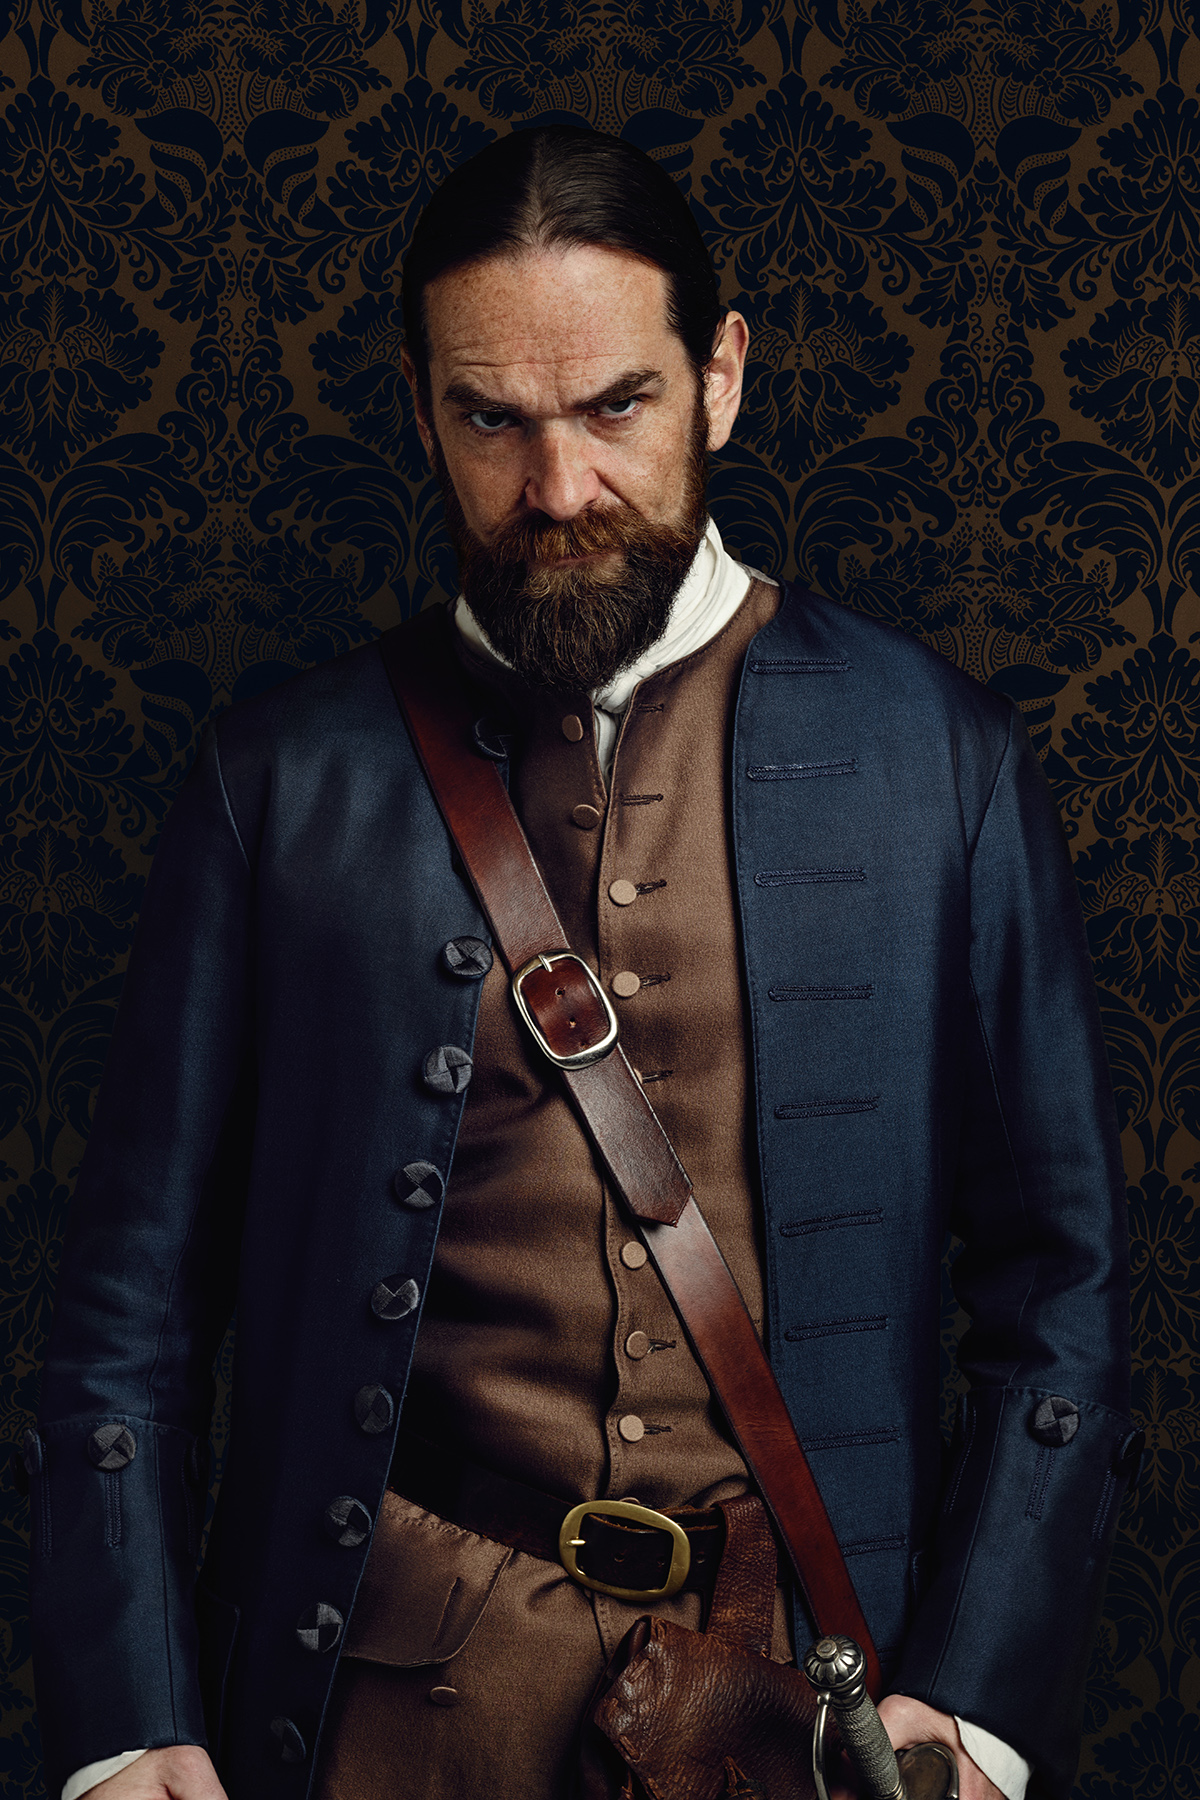 Let's all just take a moment to appreciate this bearded teddy bear. (Duncan Lacroix as Murtagh Fitzgibbons.)